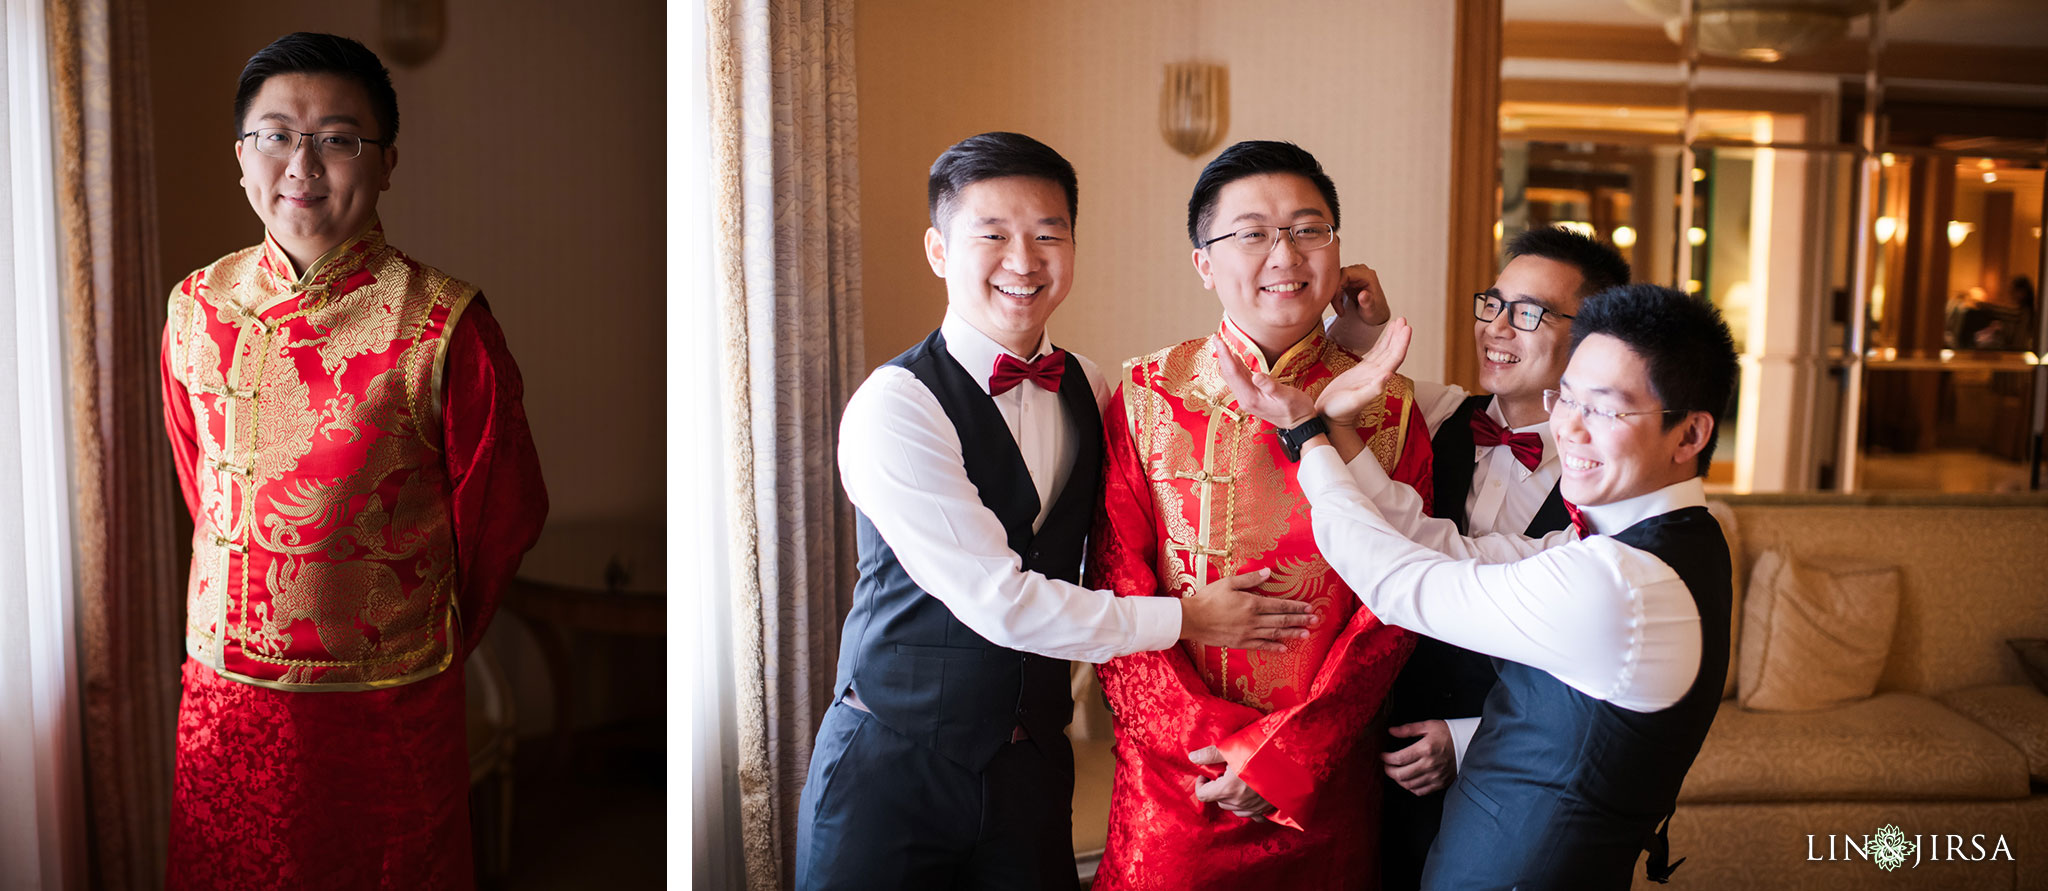 03 pelican hill orange county chinese wedding photography